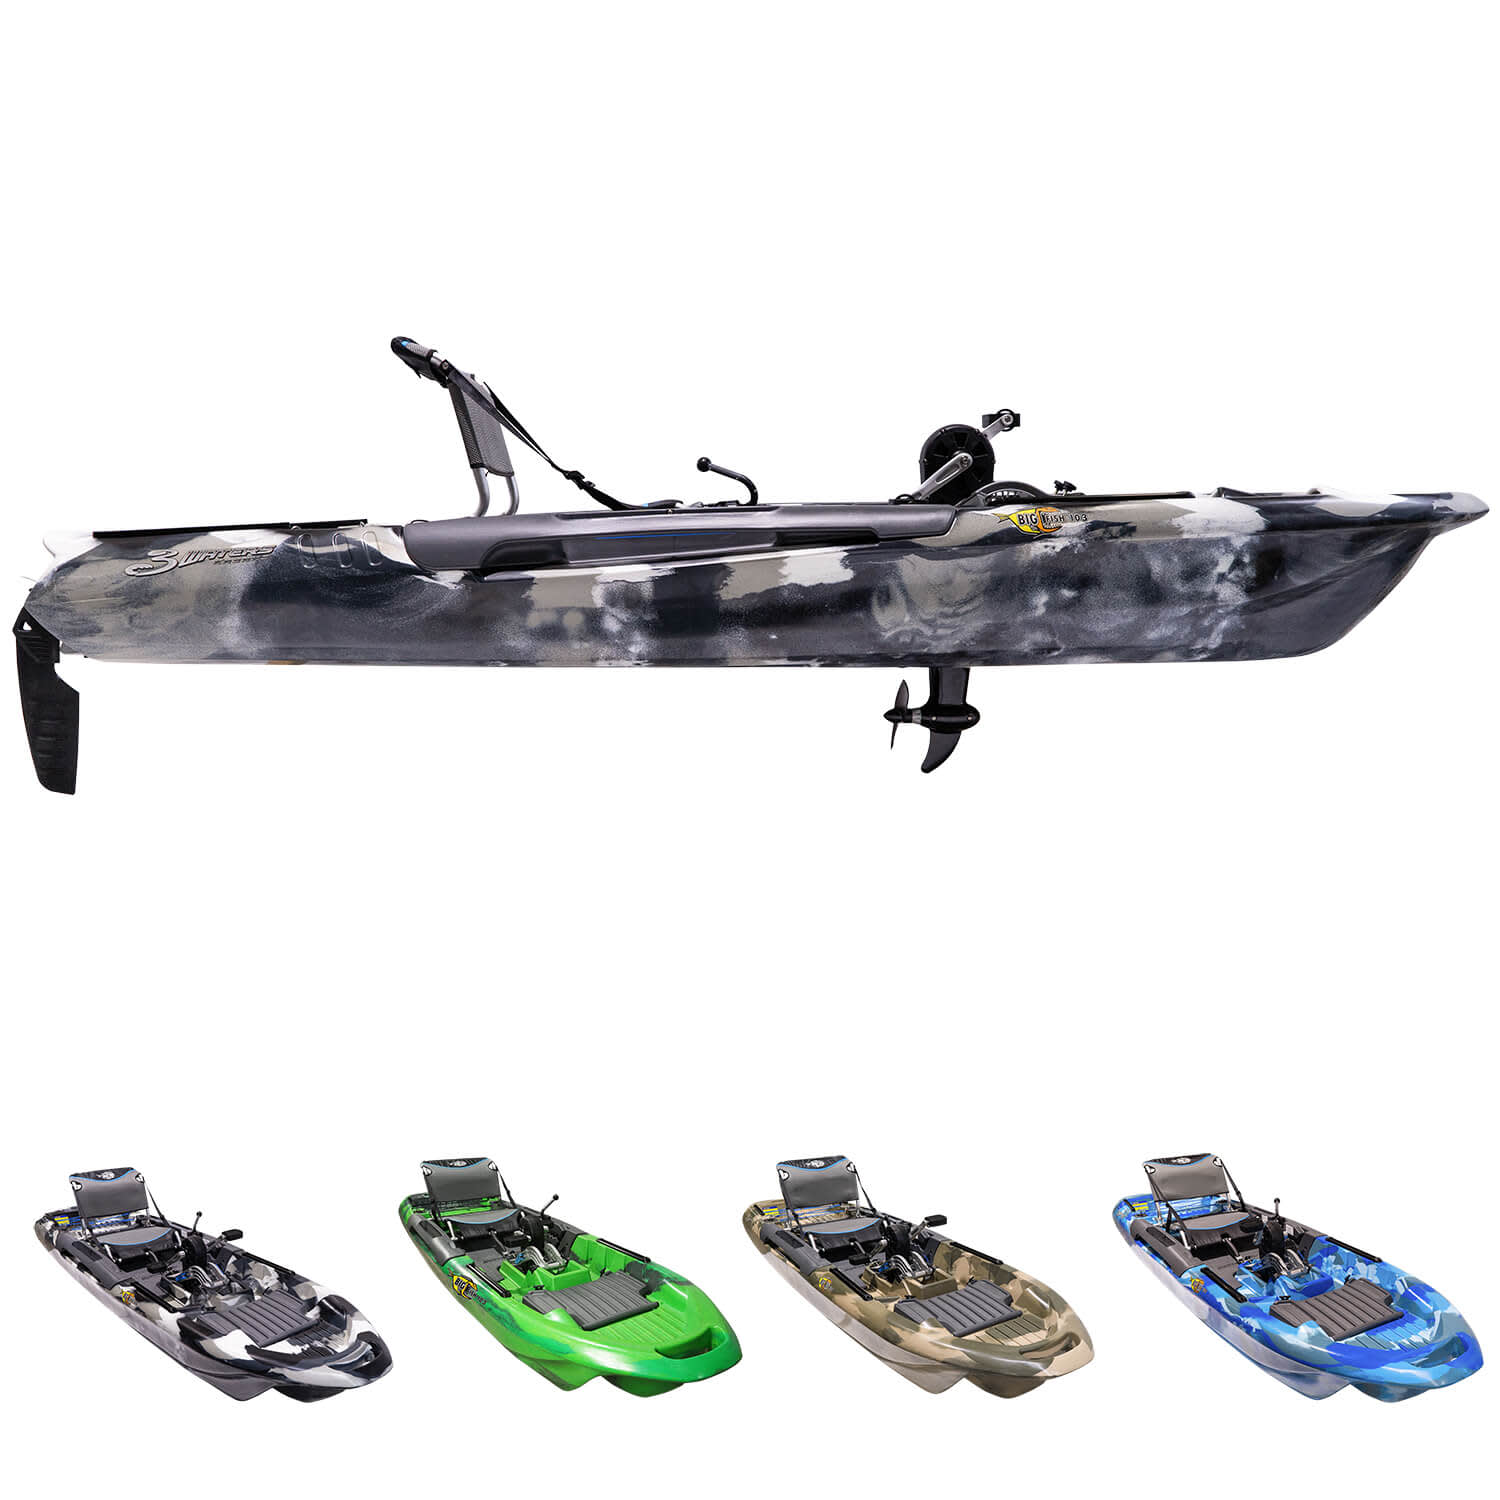 https://koeder-laden.mo.cloudinary.net/out/pictures/master/product/1/3waters-kayaks-big-fish-103-kajak-alle.jpg